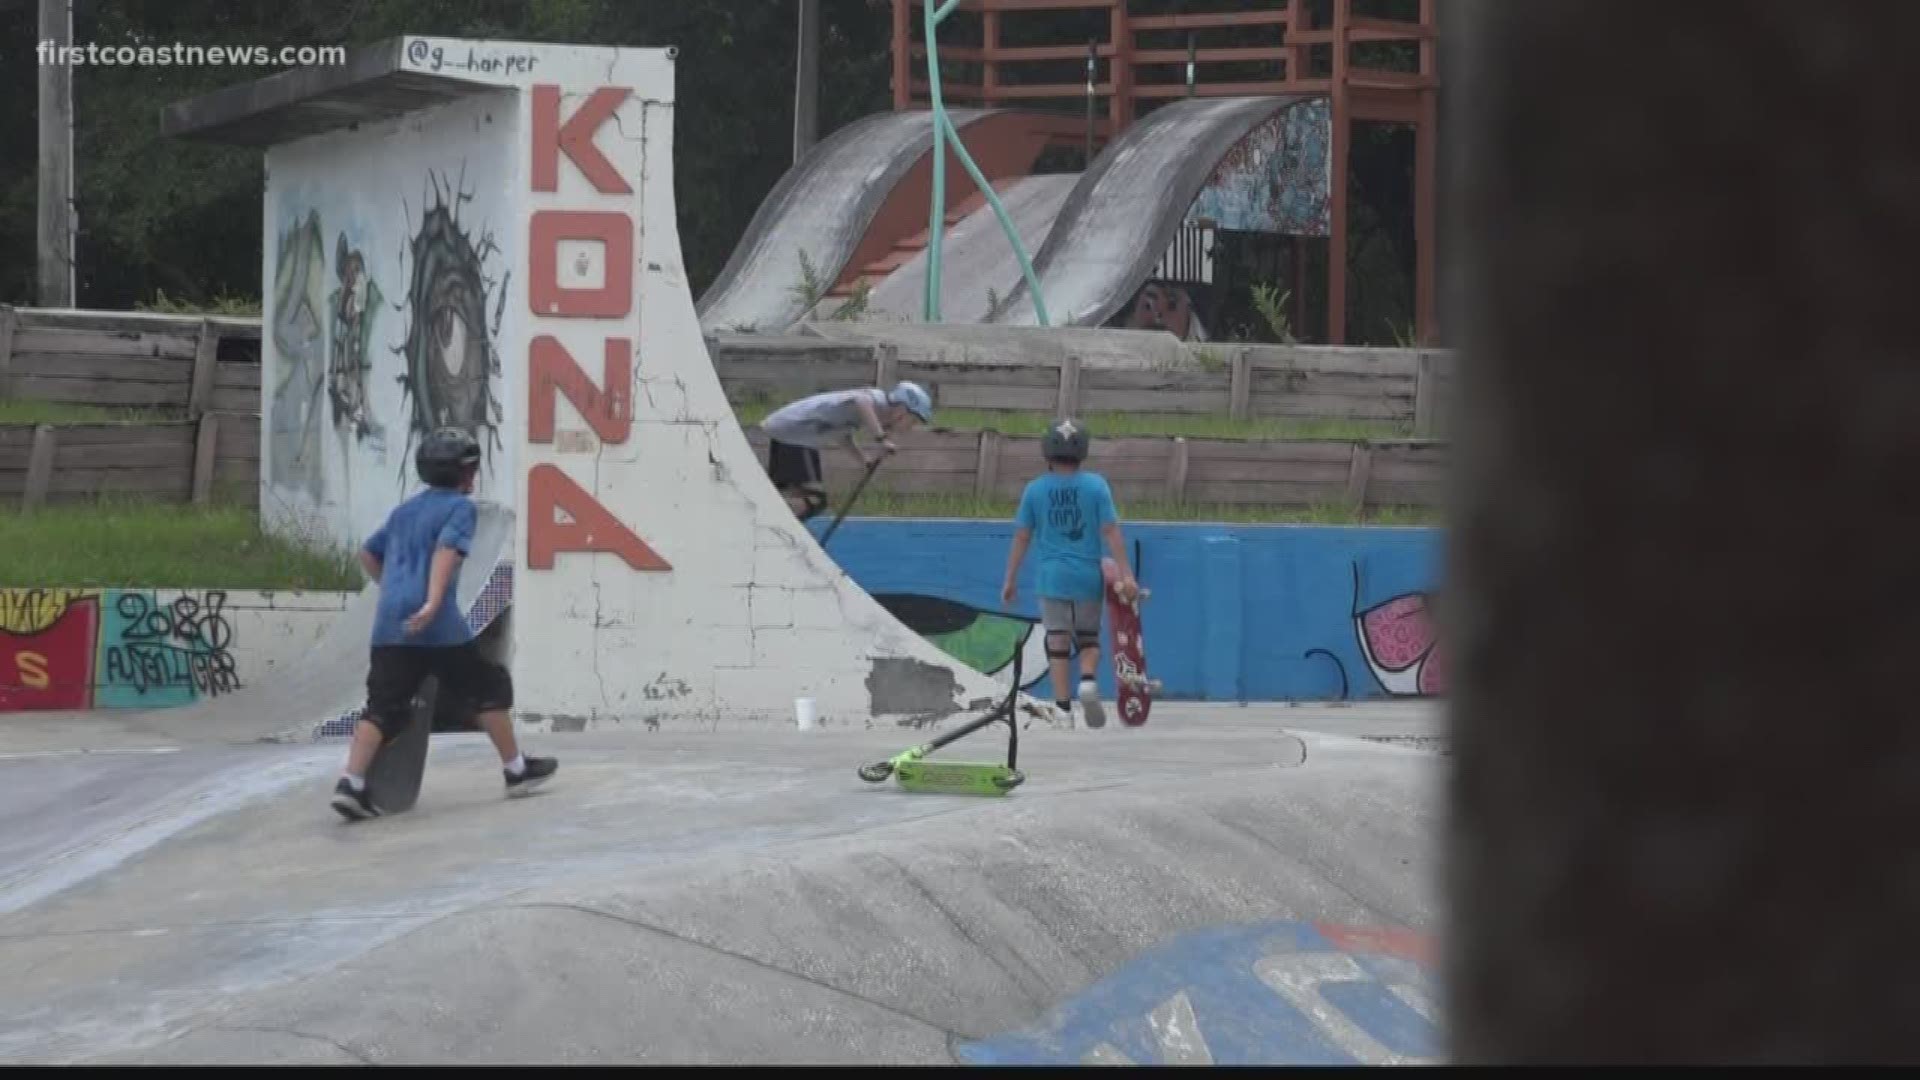 First Coast News reached out to local skateboarders for their thoughts on the sport being added to the Olympics.